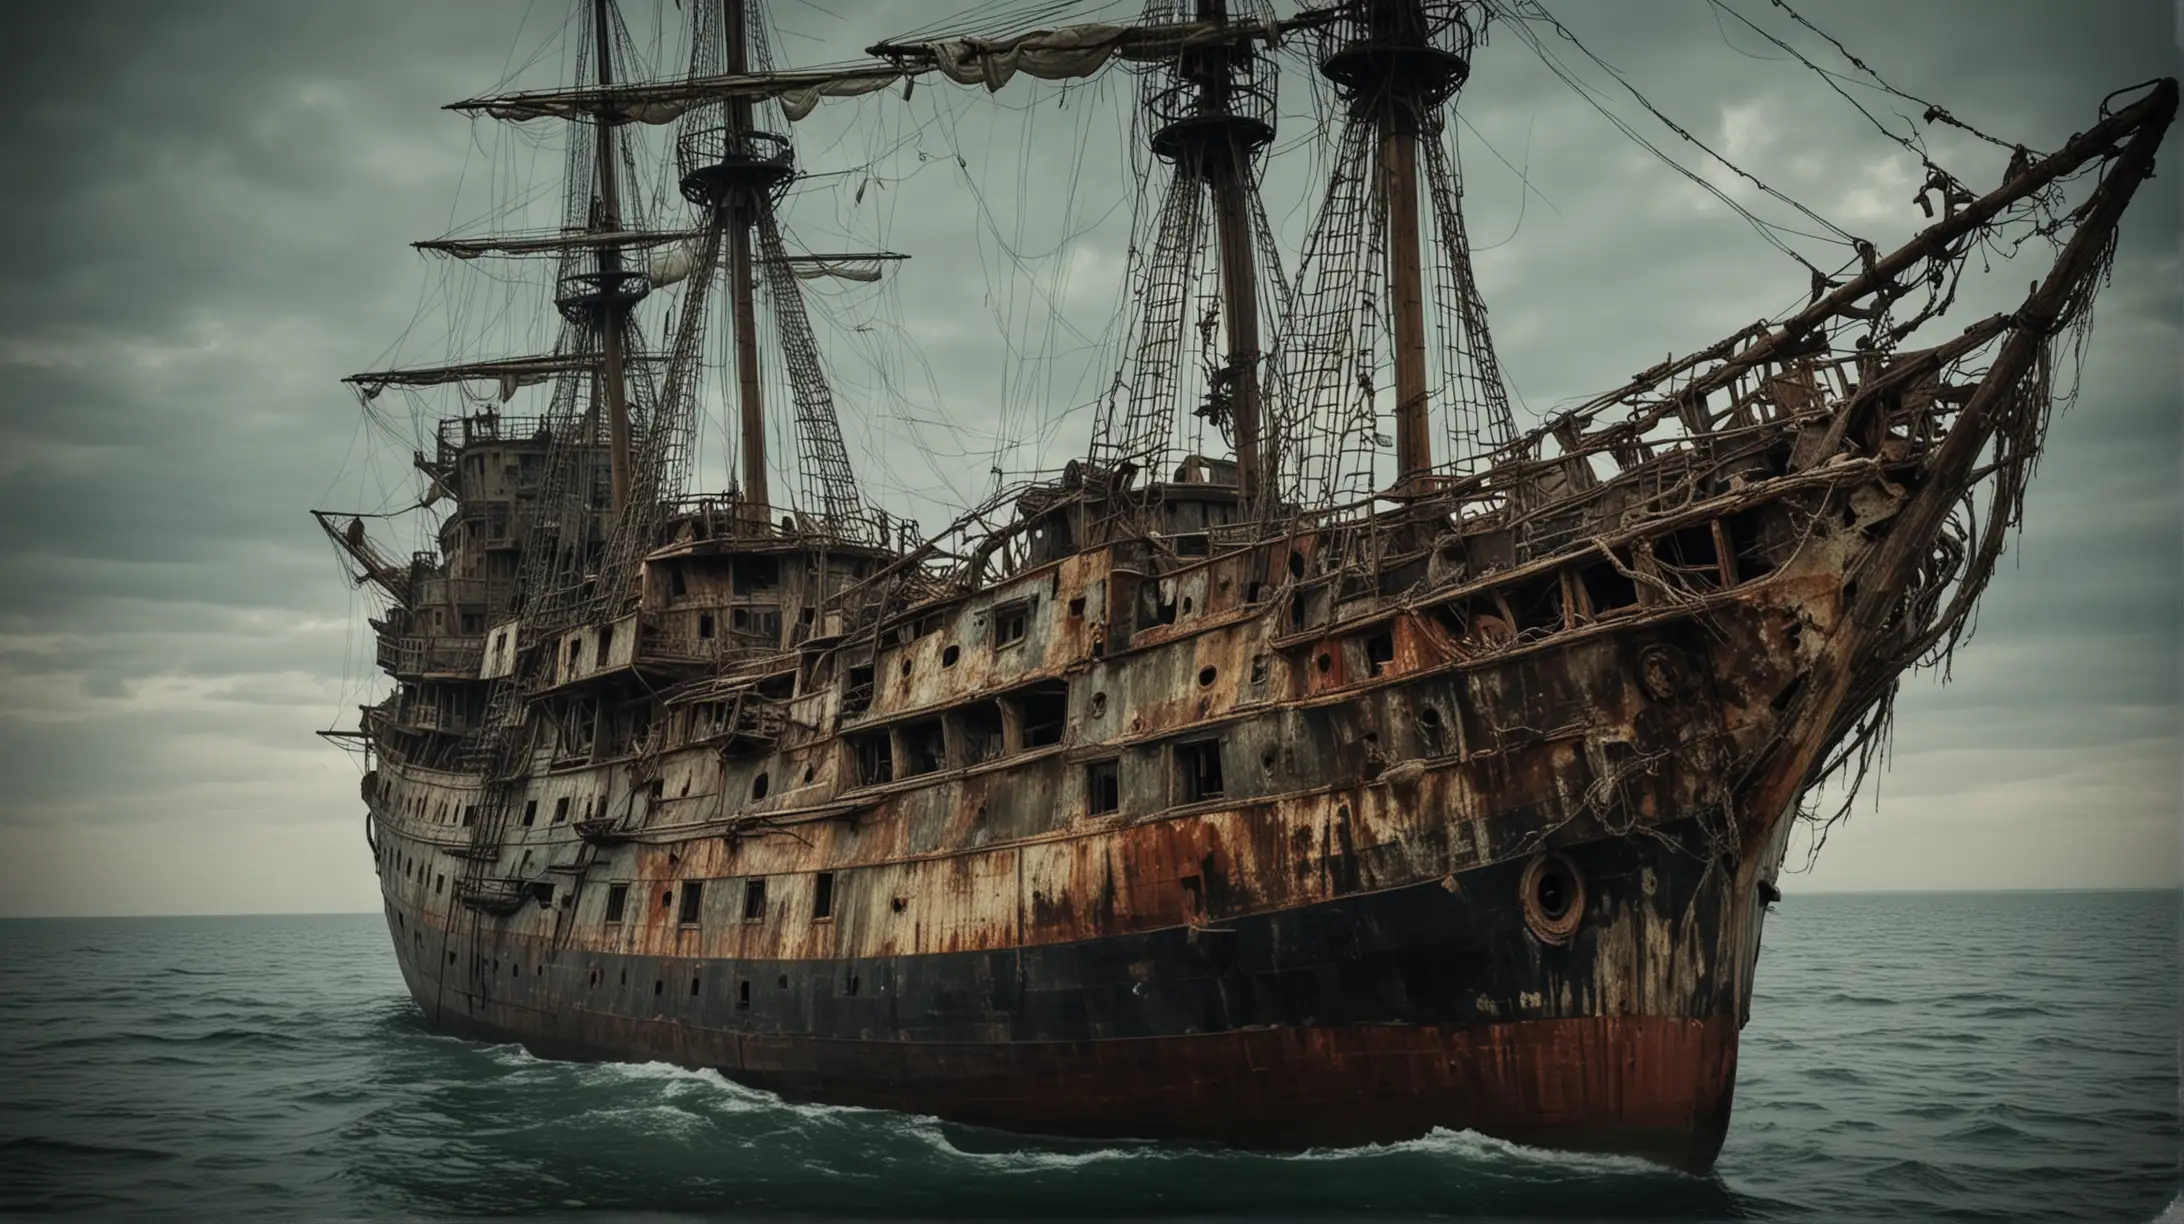 Vintage Ship Half Infected by Decay and Half Preserved in Beauty